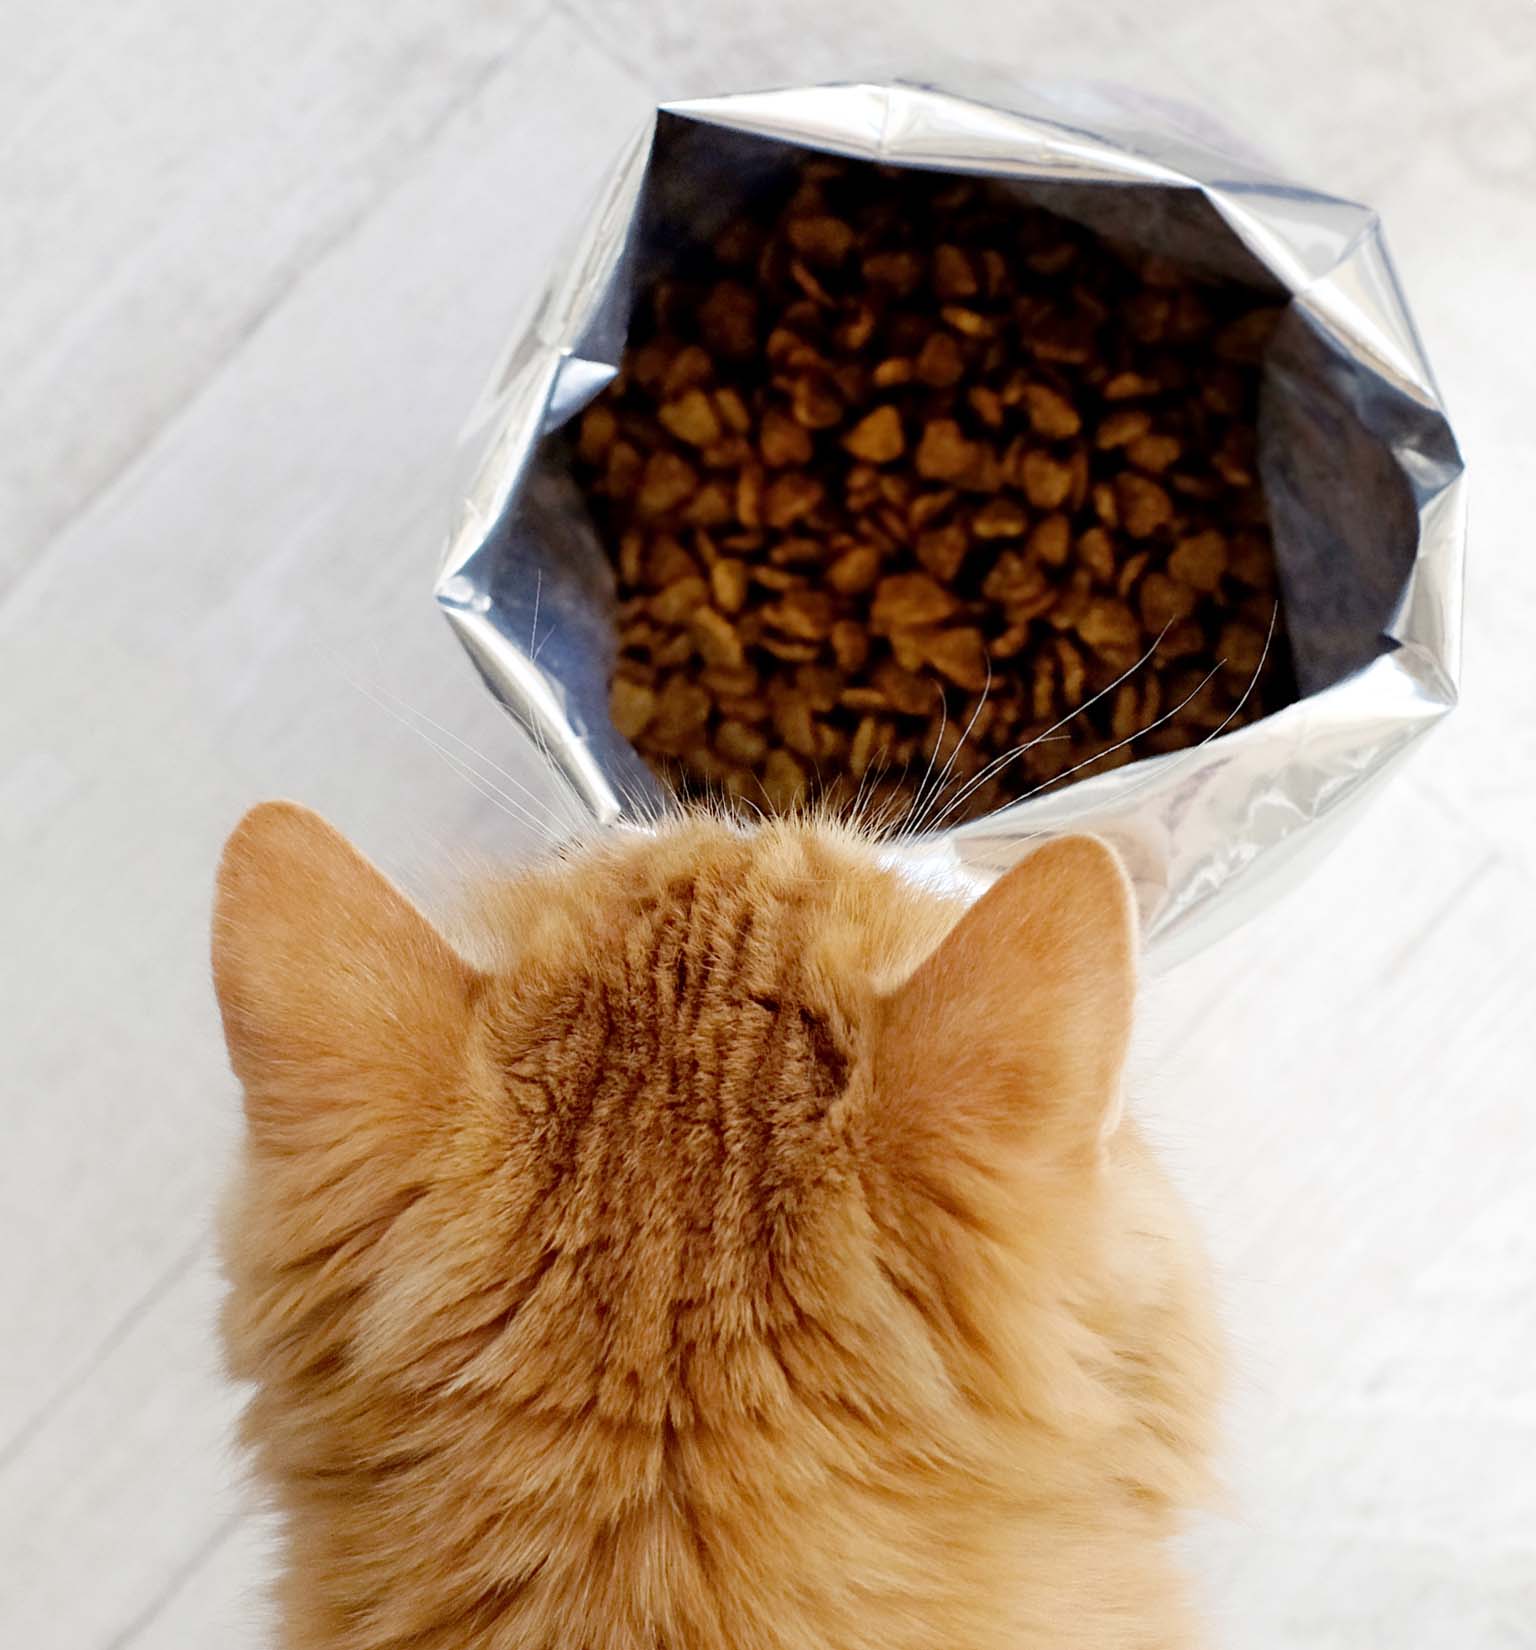 Should I feed my cat dry food or wet food?